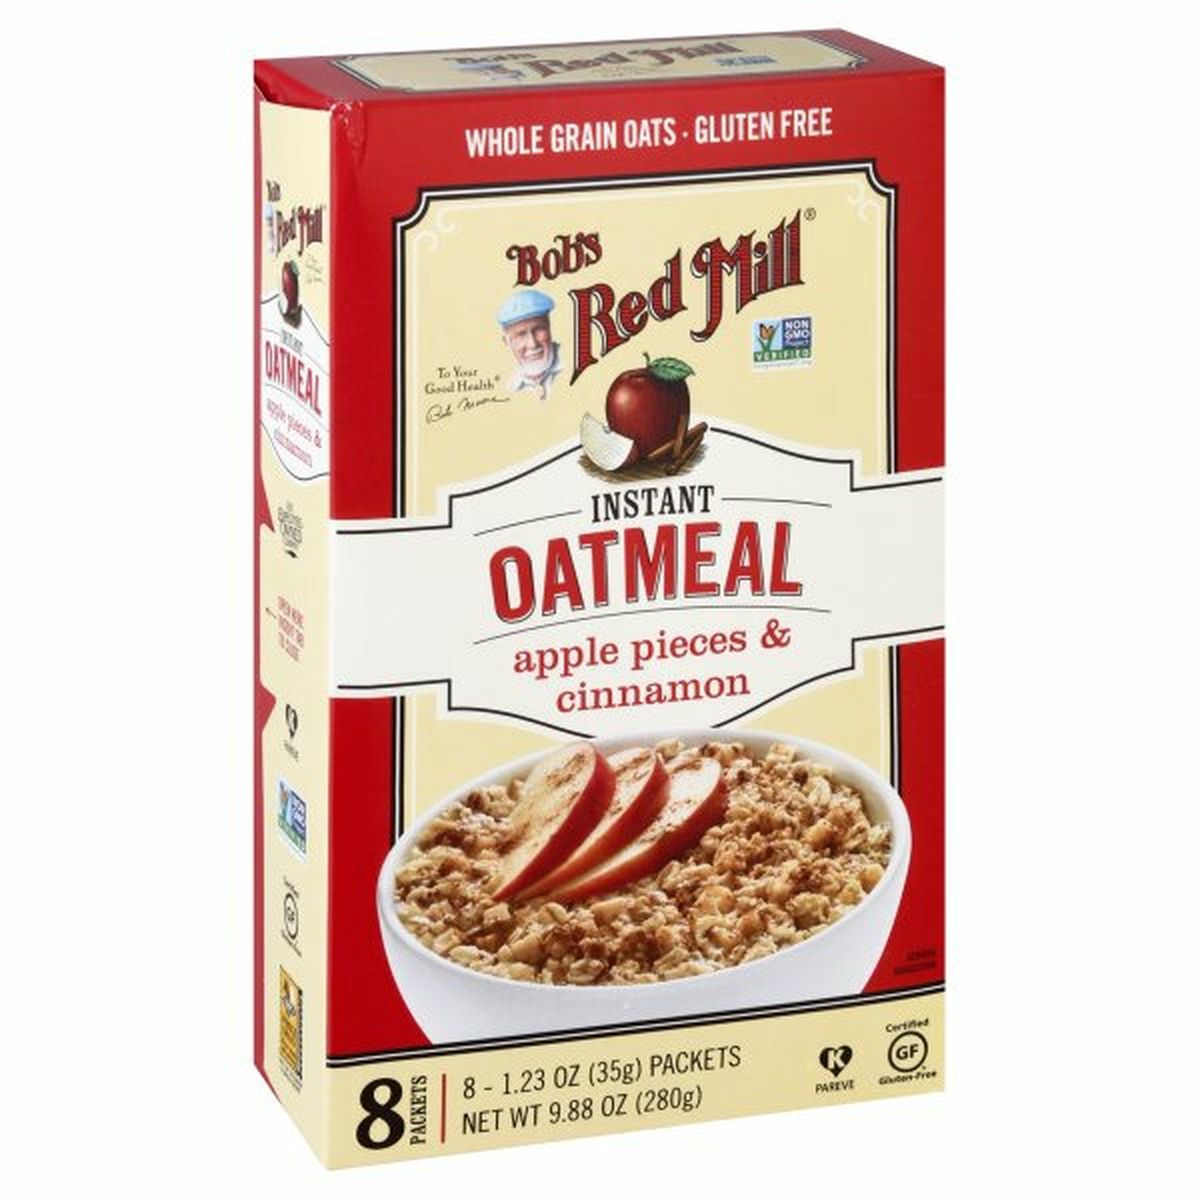 Calories in Bob's Red Mill Oatmeal, Apple Pieces & Cinnamon, Instant